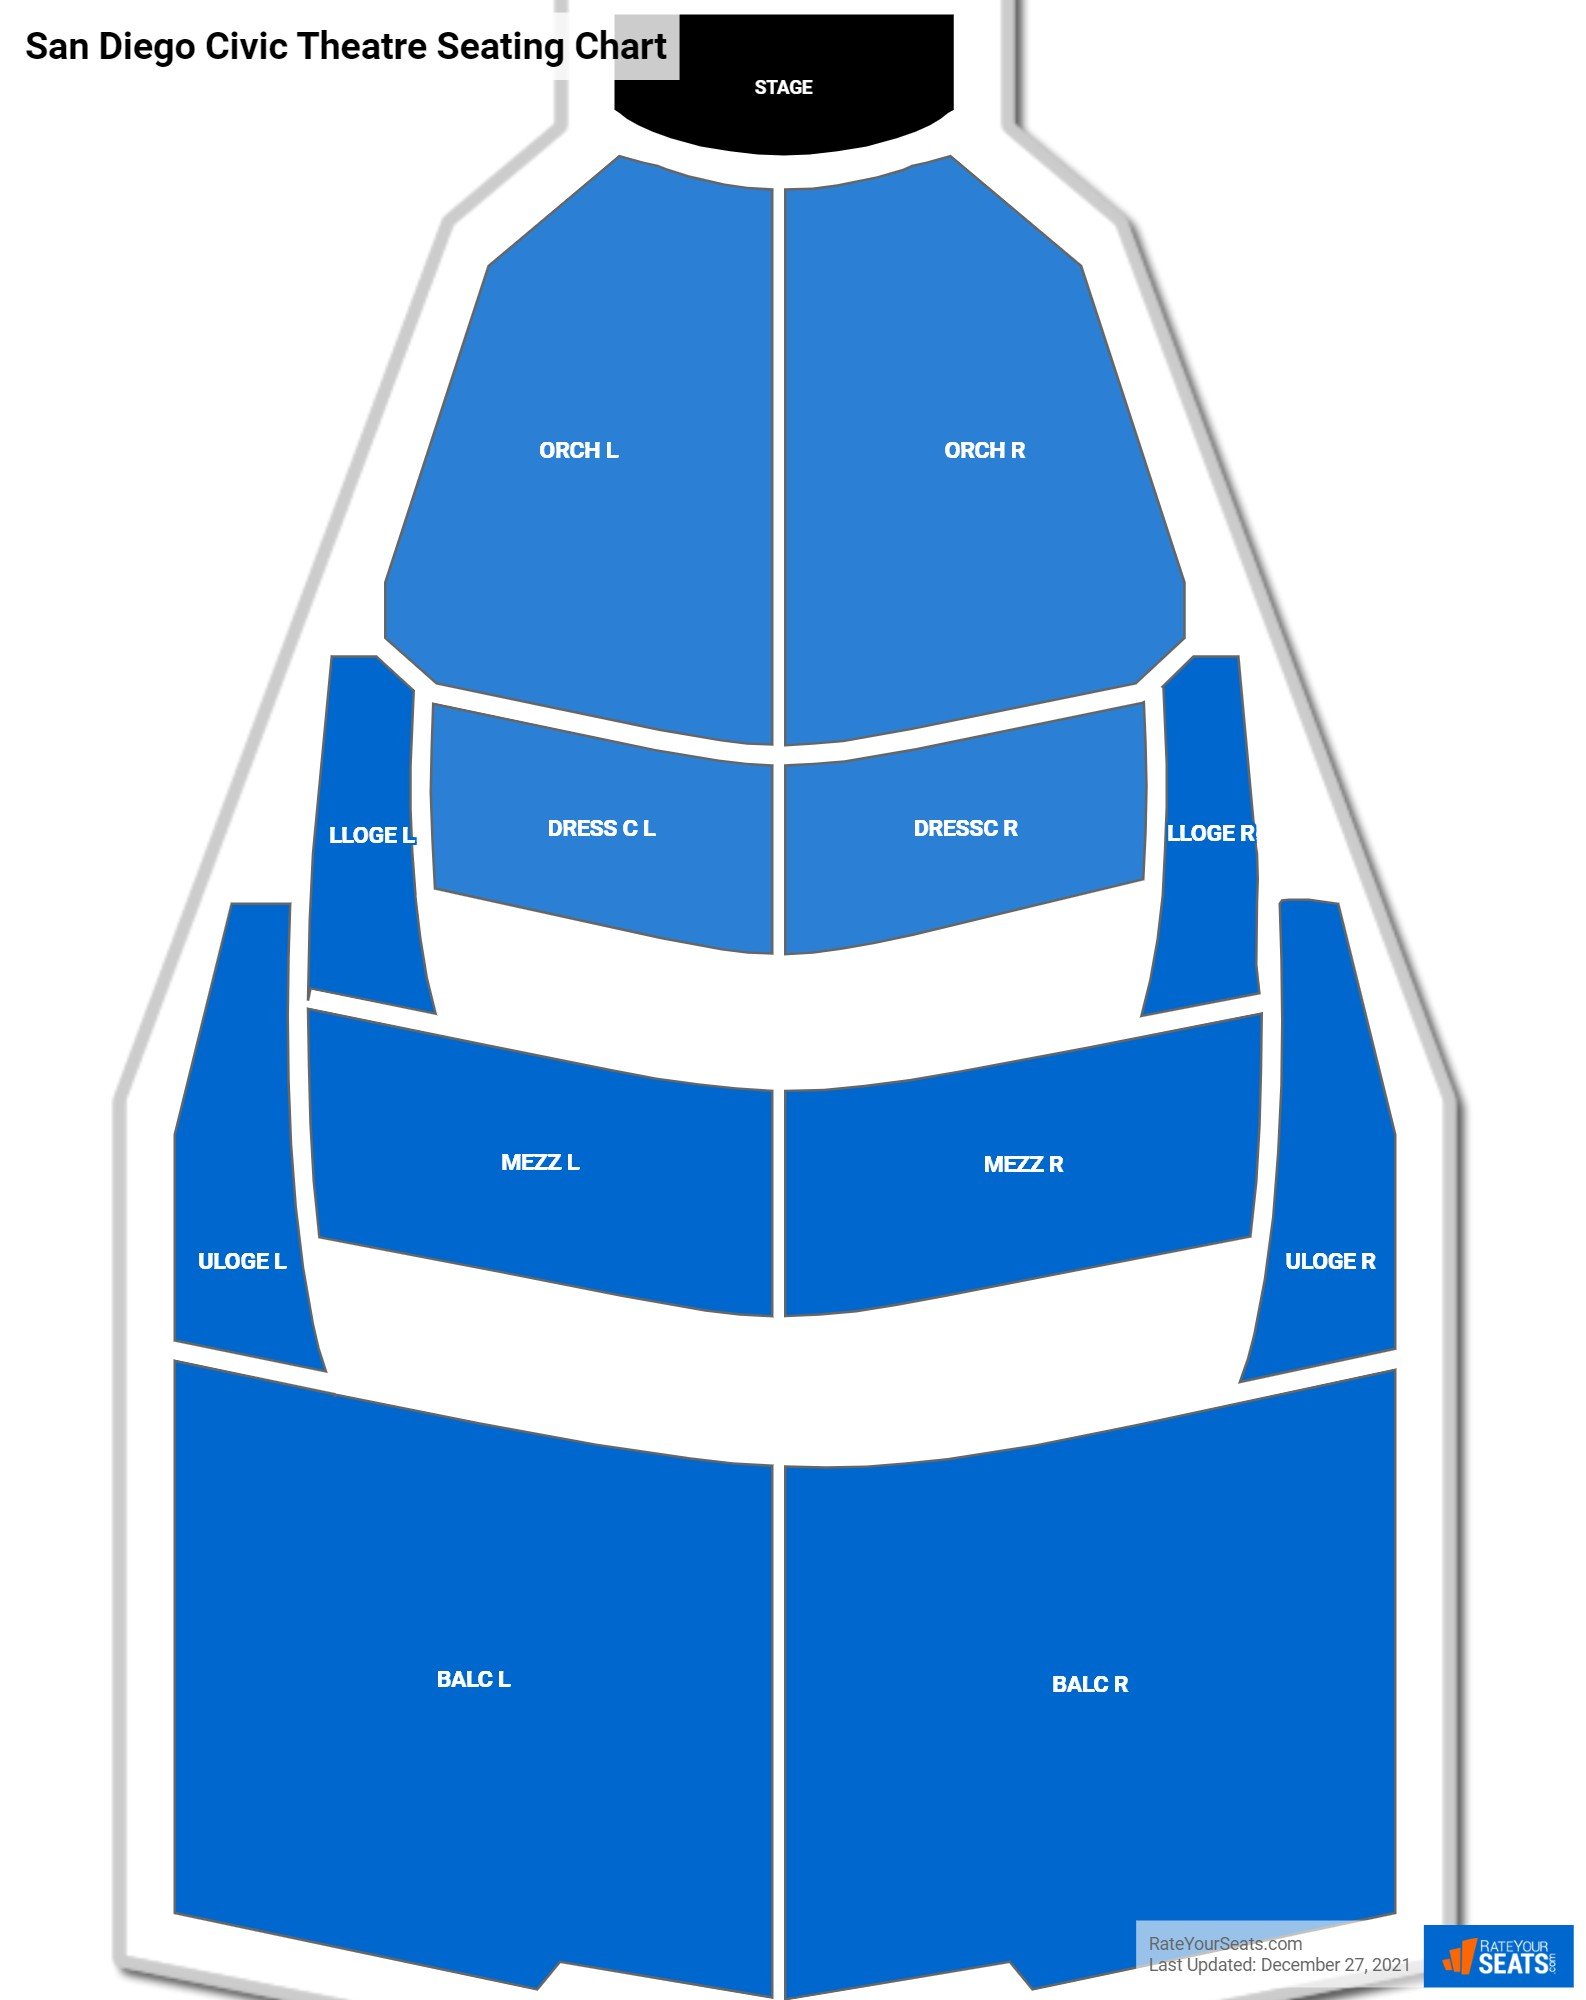 San Diego Civic Theatre Theater Seating Chart